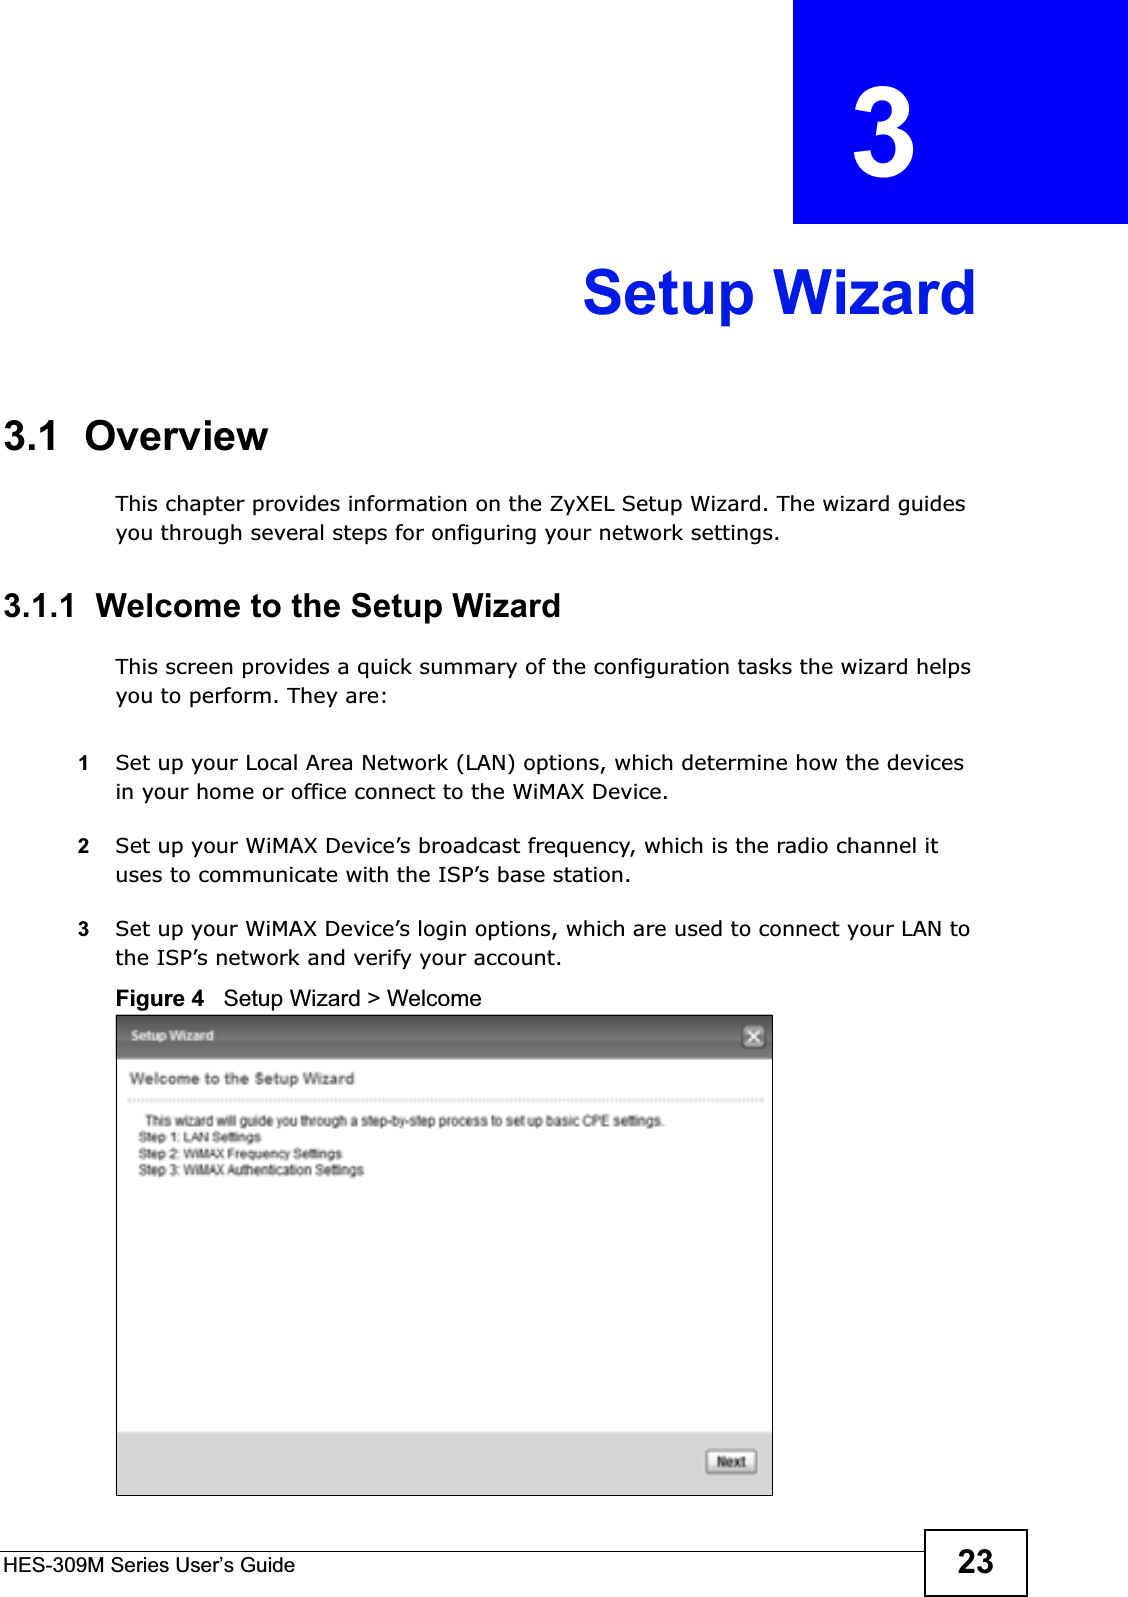 HES-309M Series User’s Guide 23CHAPTER  3 Setup Wizard3.1  OverviewThis chapter provides information on the ZyXEL Setup Wizard. The wizard guides you through several steps for onfiguring your network settings.3.1.1  Welcome to the Setup WizardThis screen provides a quick summary of the configuration tasks the wizard helps you to perform. They are:1Set up your Local Area Network (LAN) options, which determine how the devices in your home or office connect to the WiMAX Device.2Set up your WiMAX Device’s broadcast frequency, which is the radio channel it uses to communicate with the ISP’s base station.3Set up your WiMAX Device’s login options, which are used to connect your LAN to the ISP’s network and verify your account. Figure 4   Setup Wizard &gt; Welcome